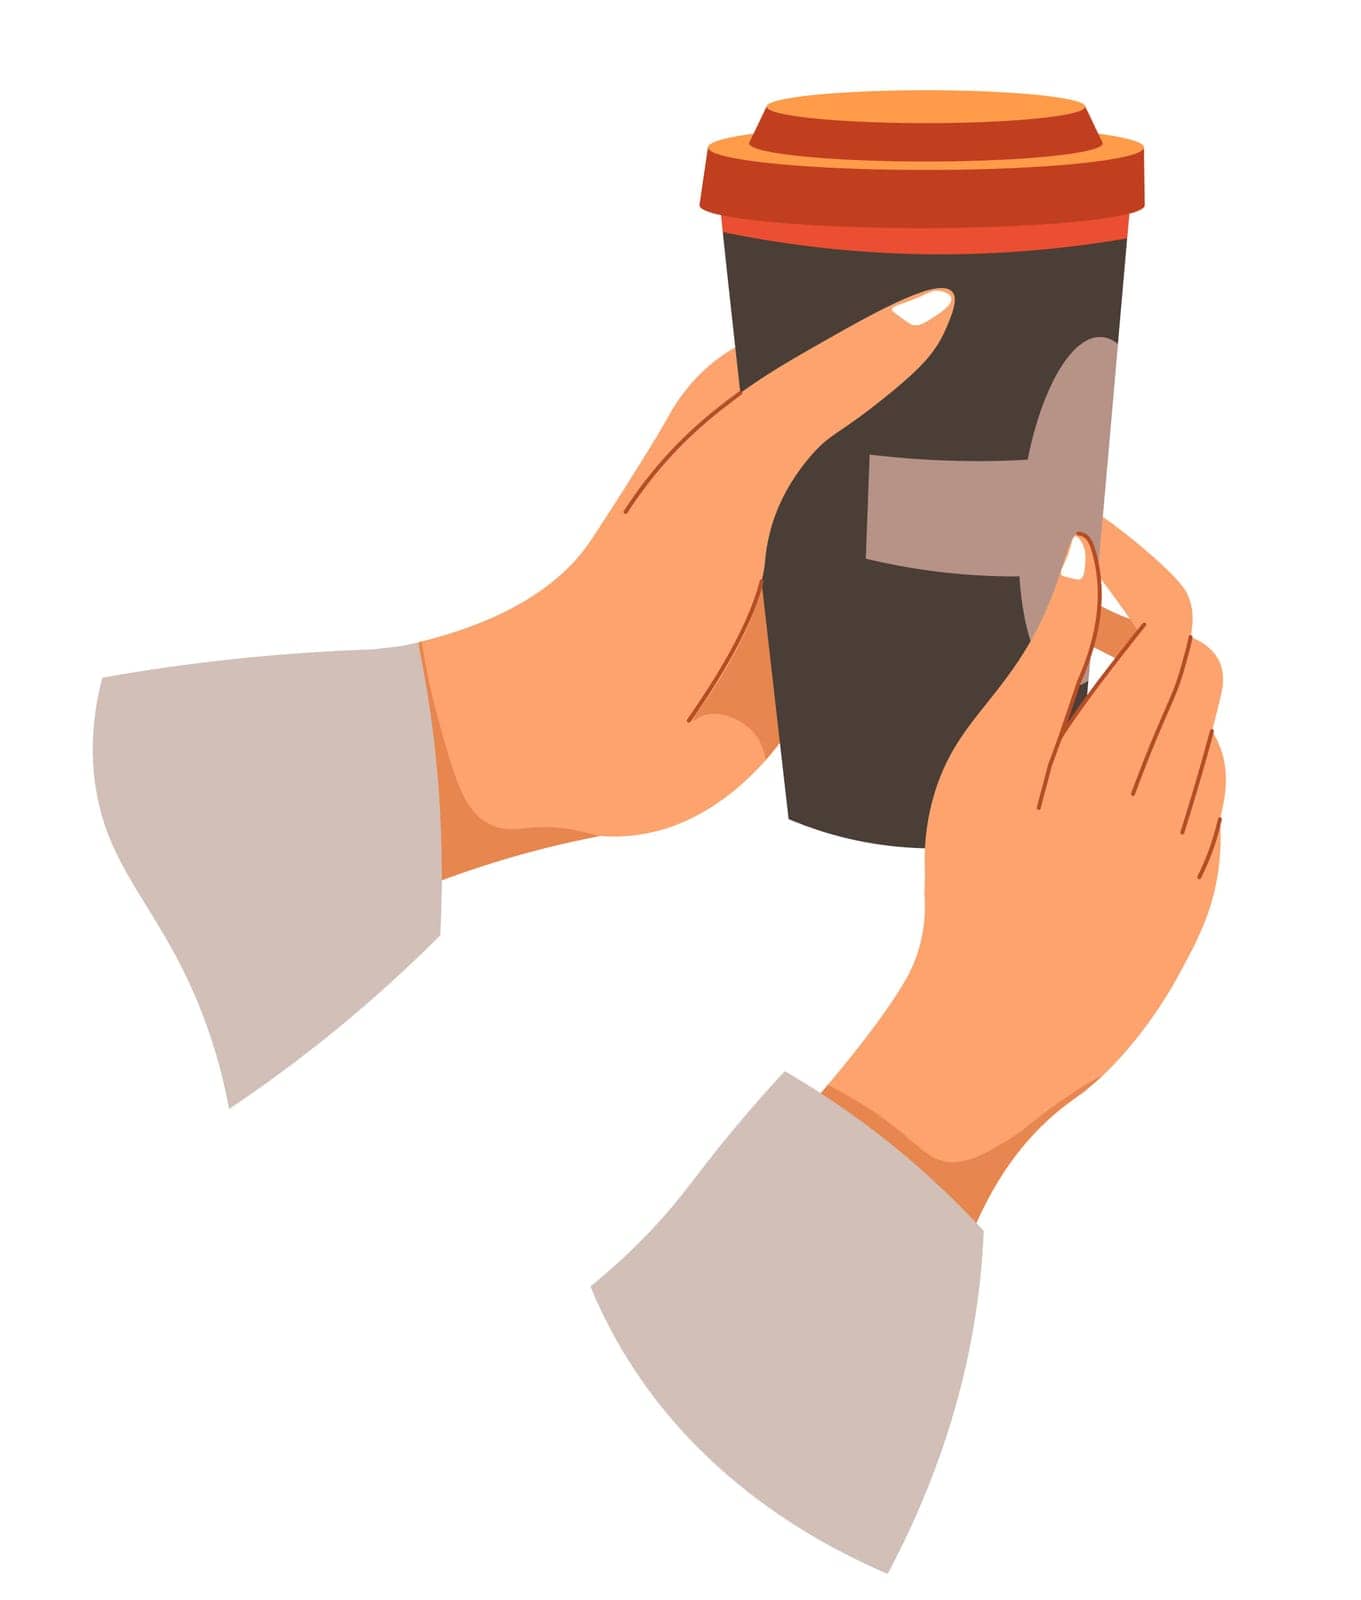 Hands holding brewed coffee in plastic or paper cup with lid or seal. Character enjoying drink to go, americano or latter served in cafe. Takeaway order in cafe or restaurant. Vector in flat style